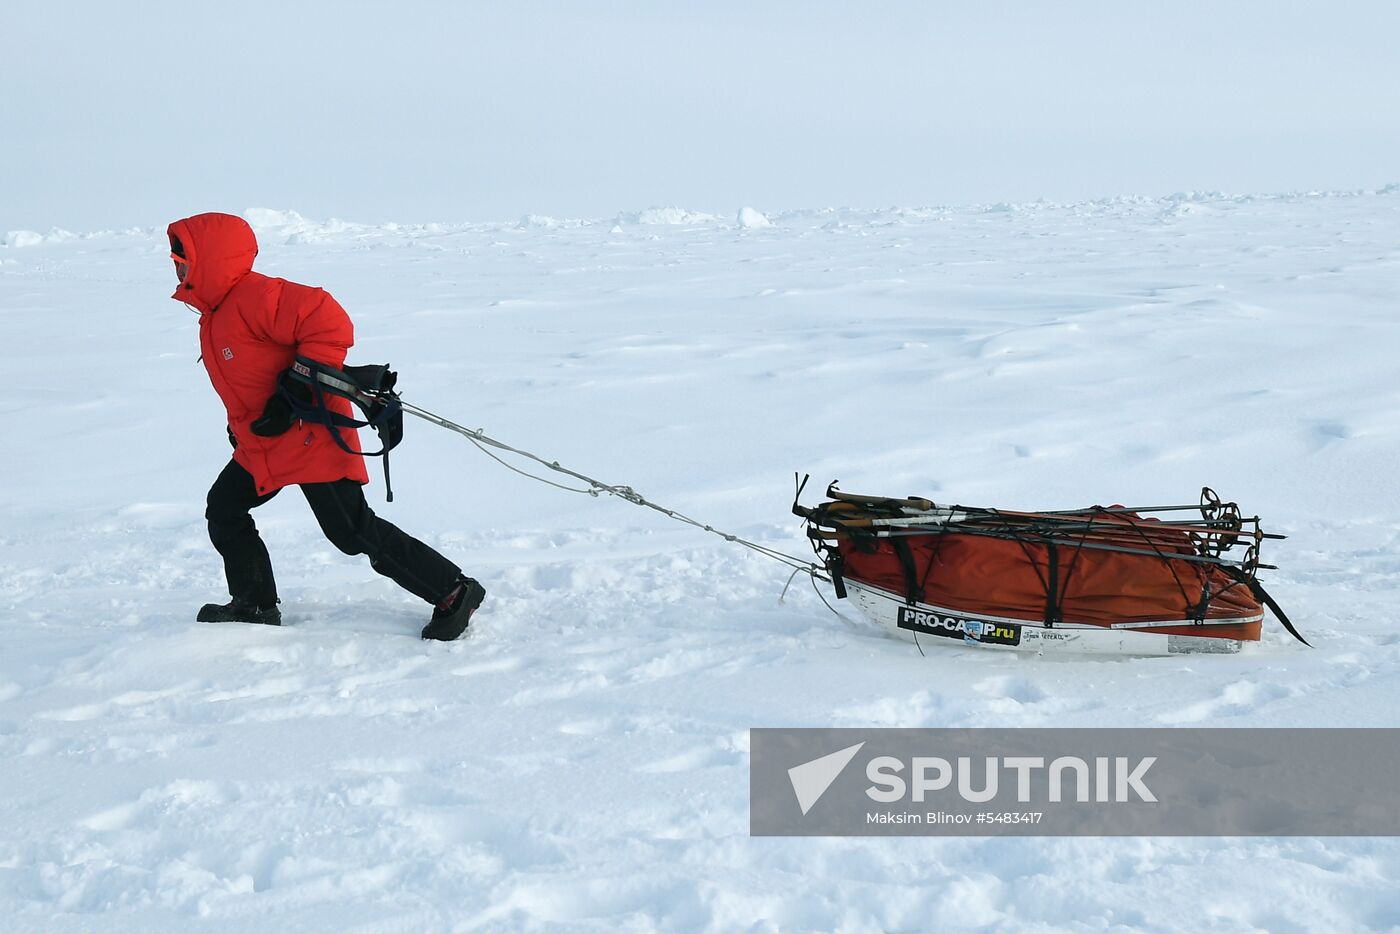 Arctic expedition to North Pole